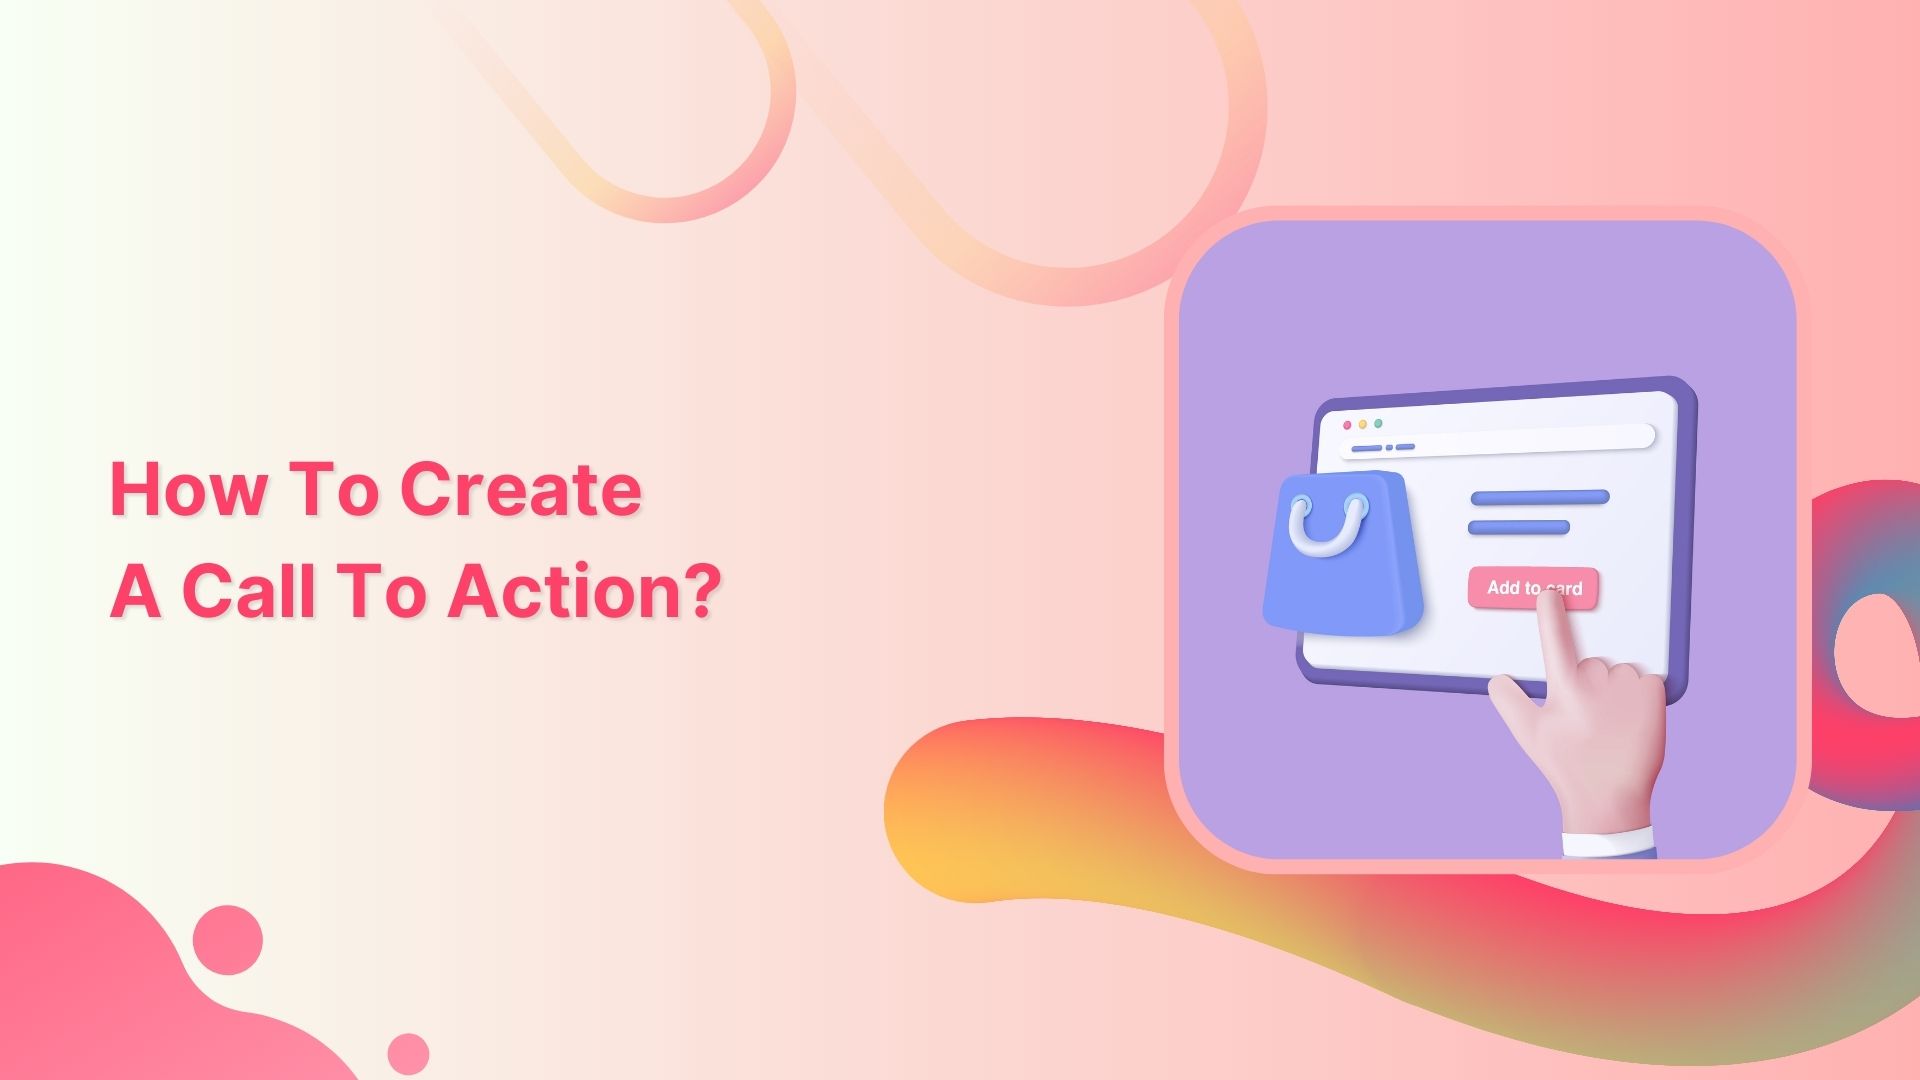 How to create a call to action using a URL shortener?